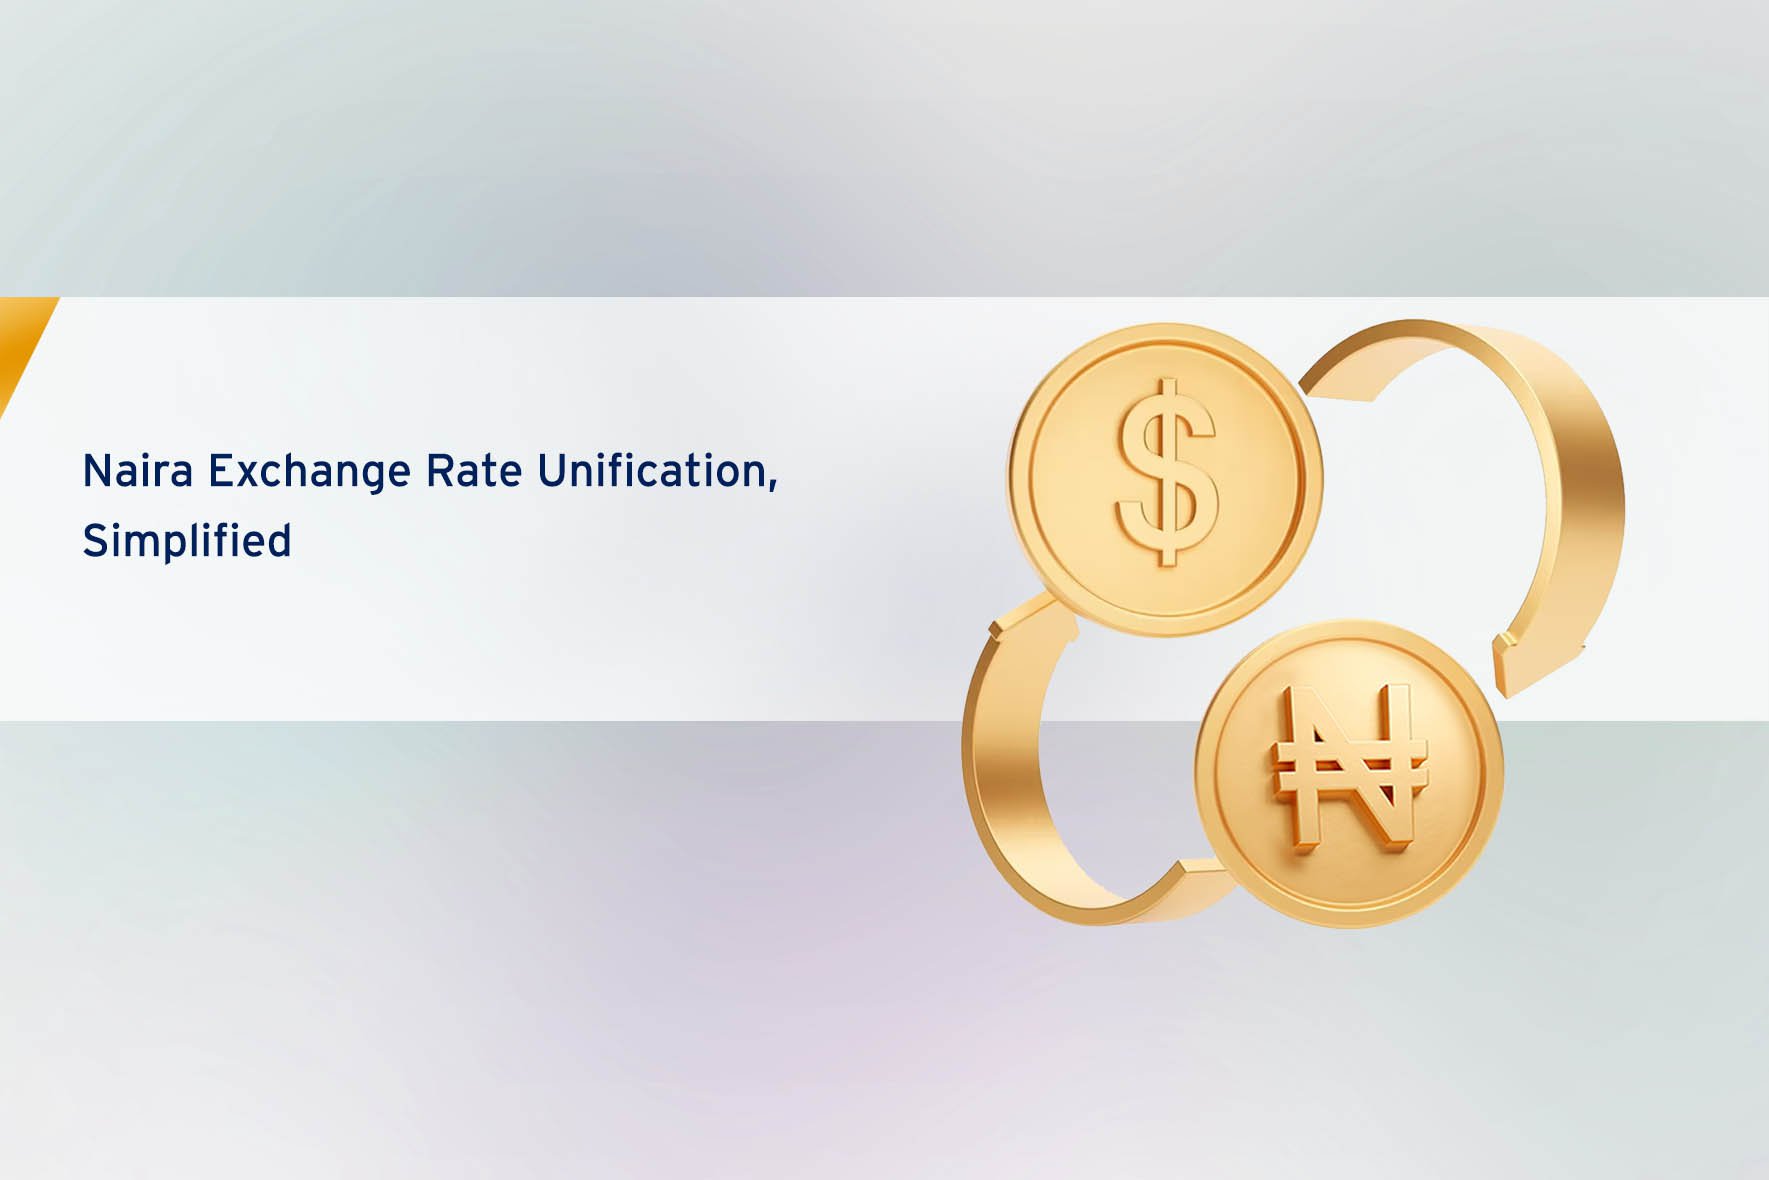 Simplified Naira Exchange Rate Unification